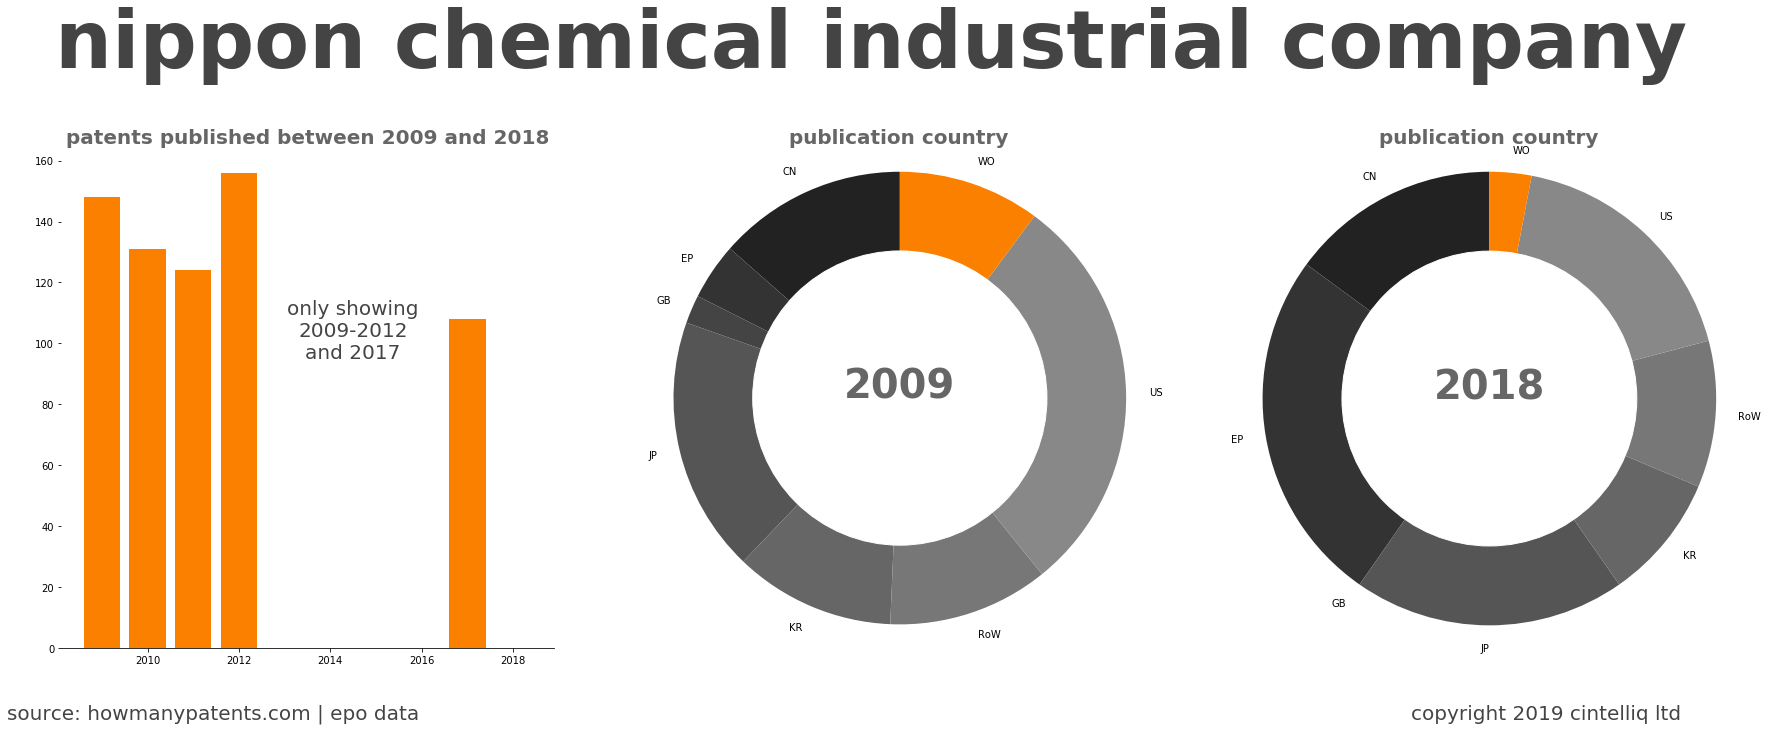 summary of patents for Nippon Chemical Industrial Company